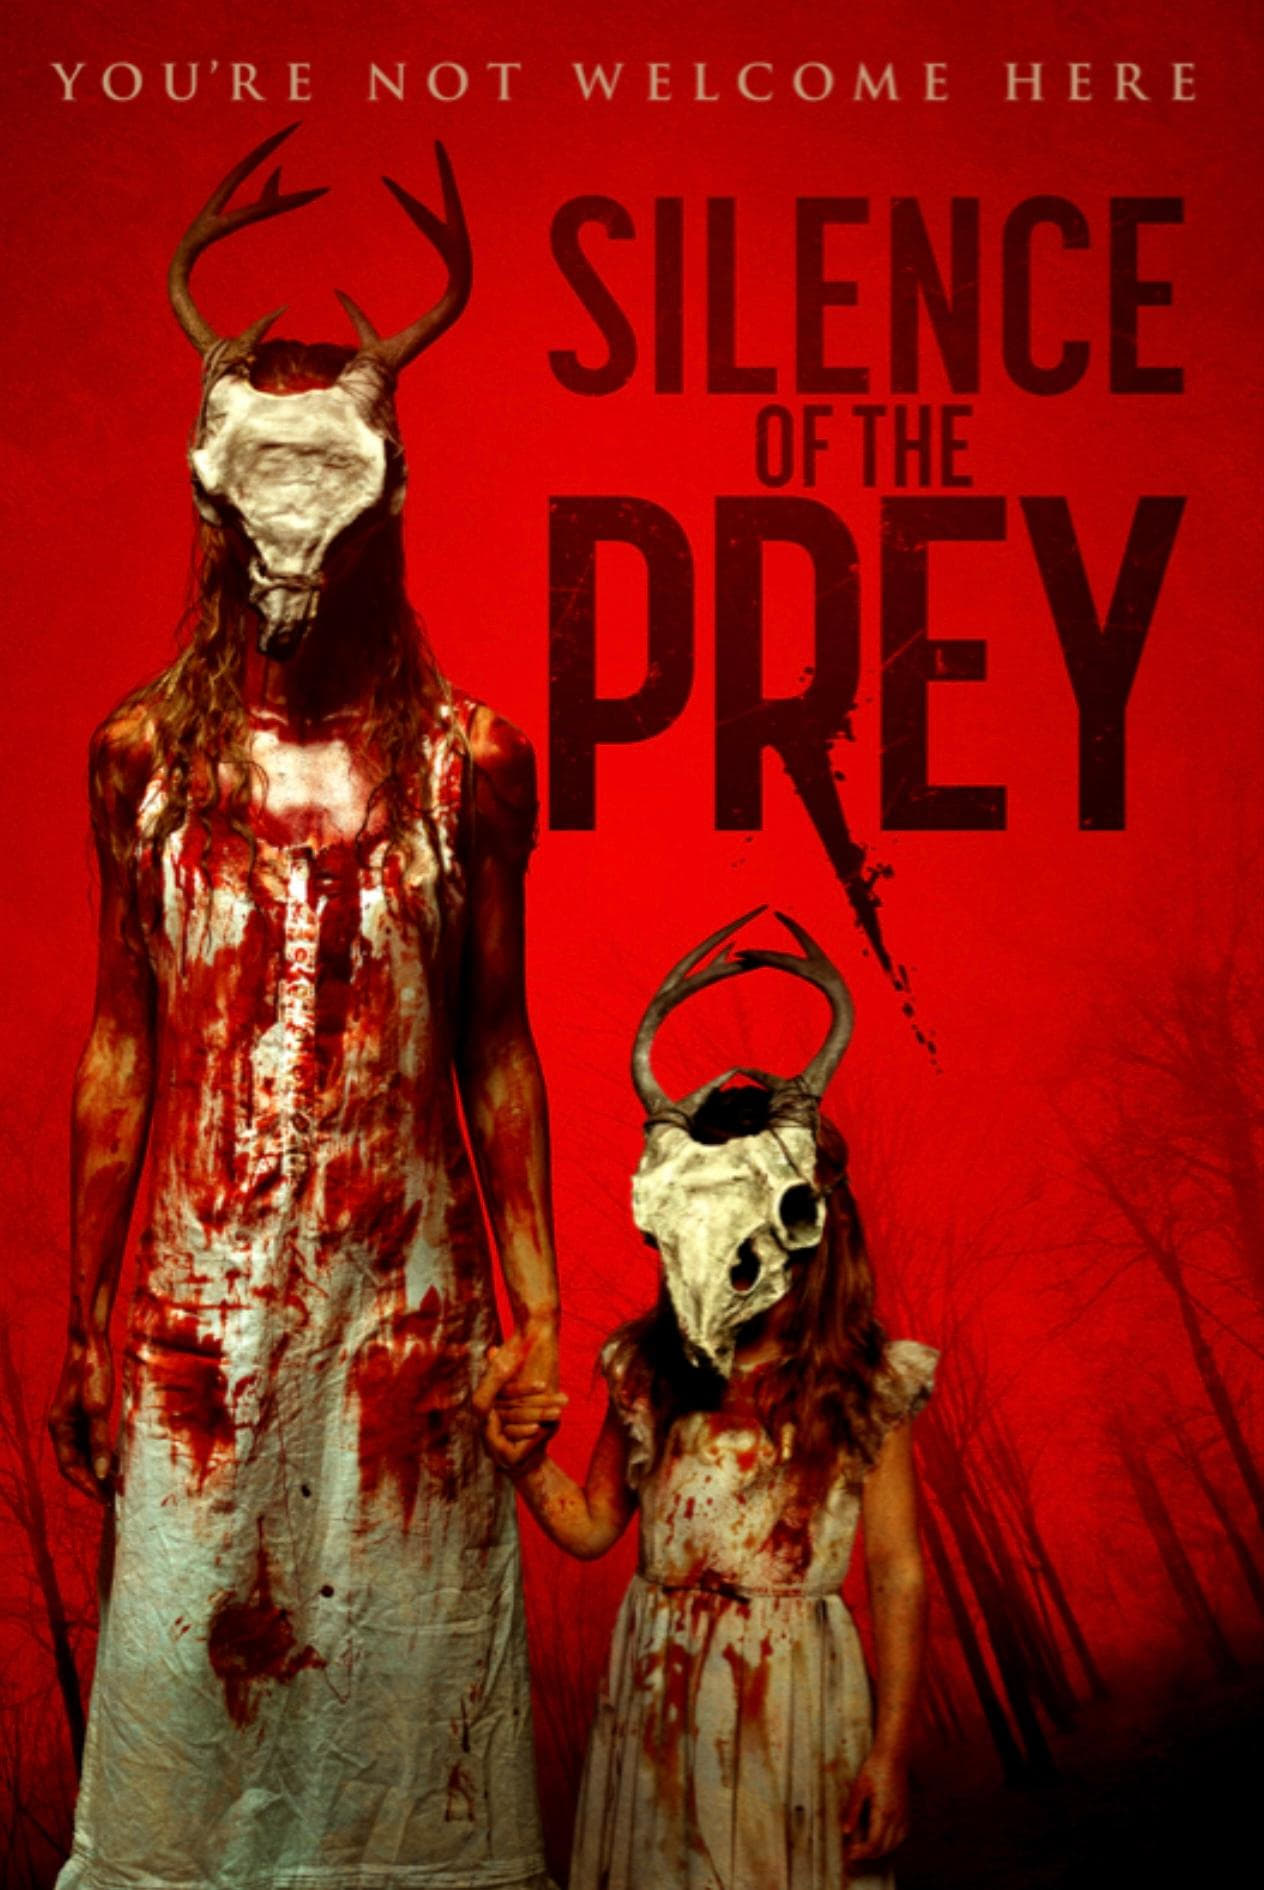 Silence of the Prey